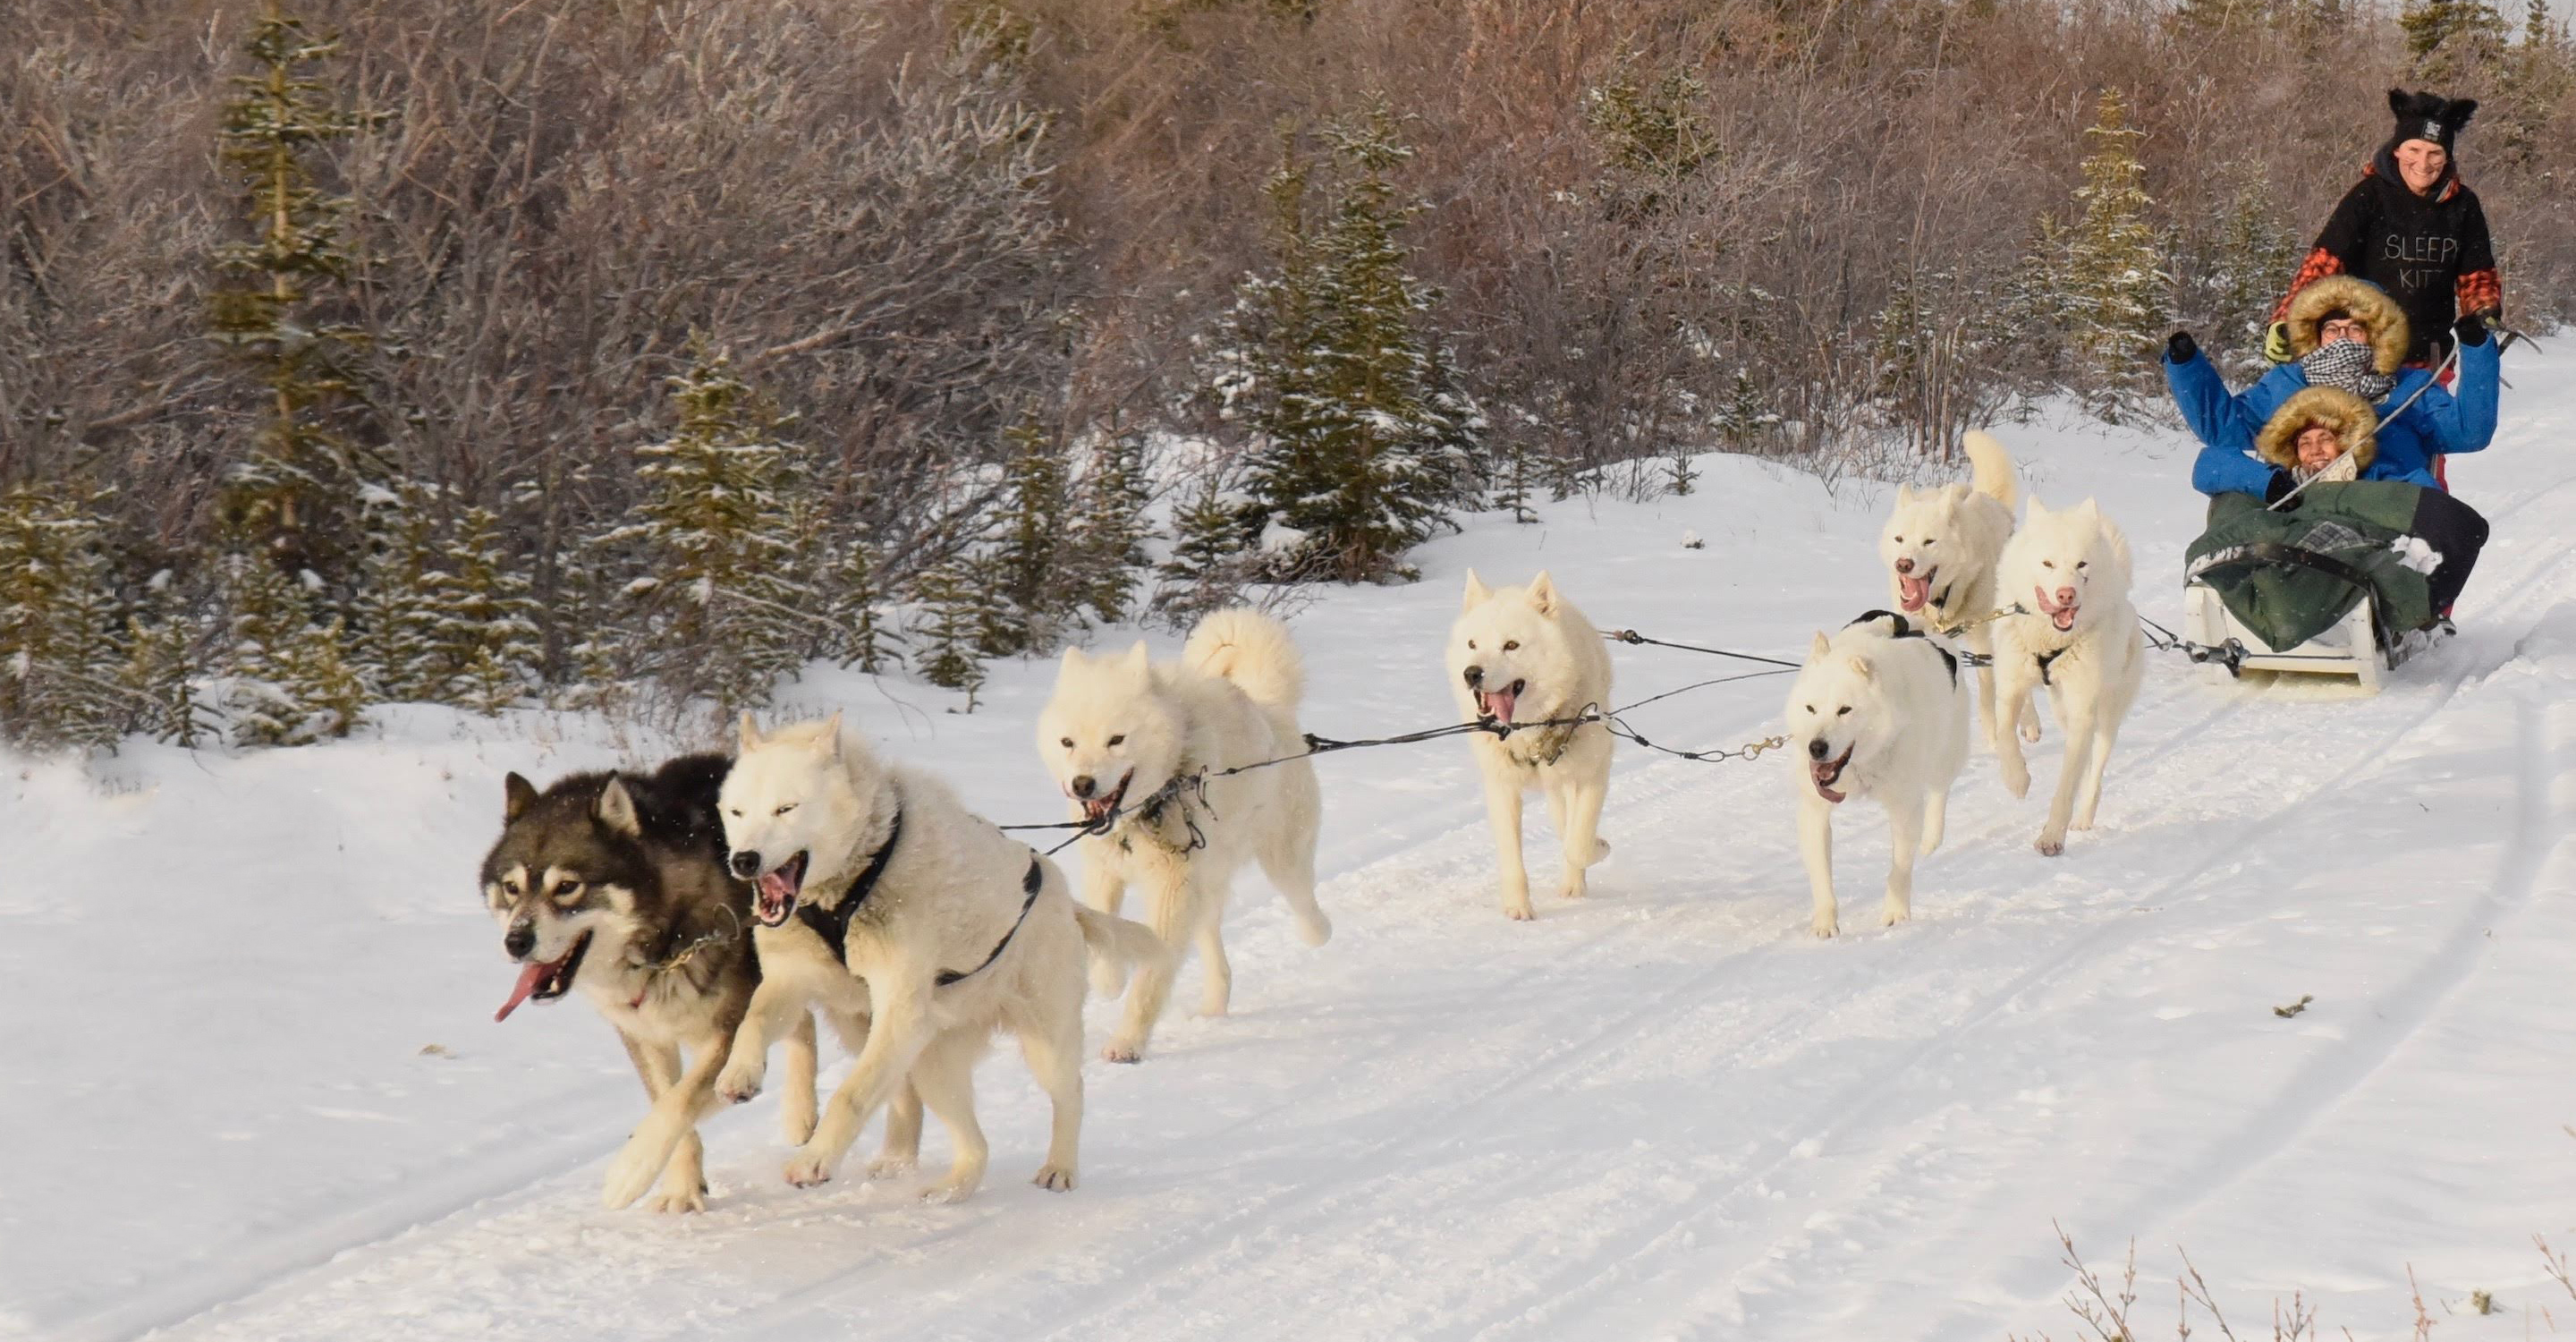 Natural Habitat Adventures travelers ride in a dogsled, Churchill, Manitoba, Canada